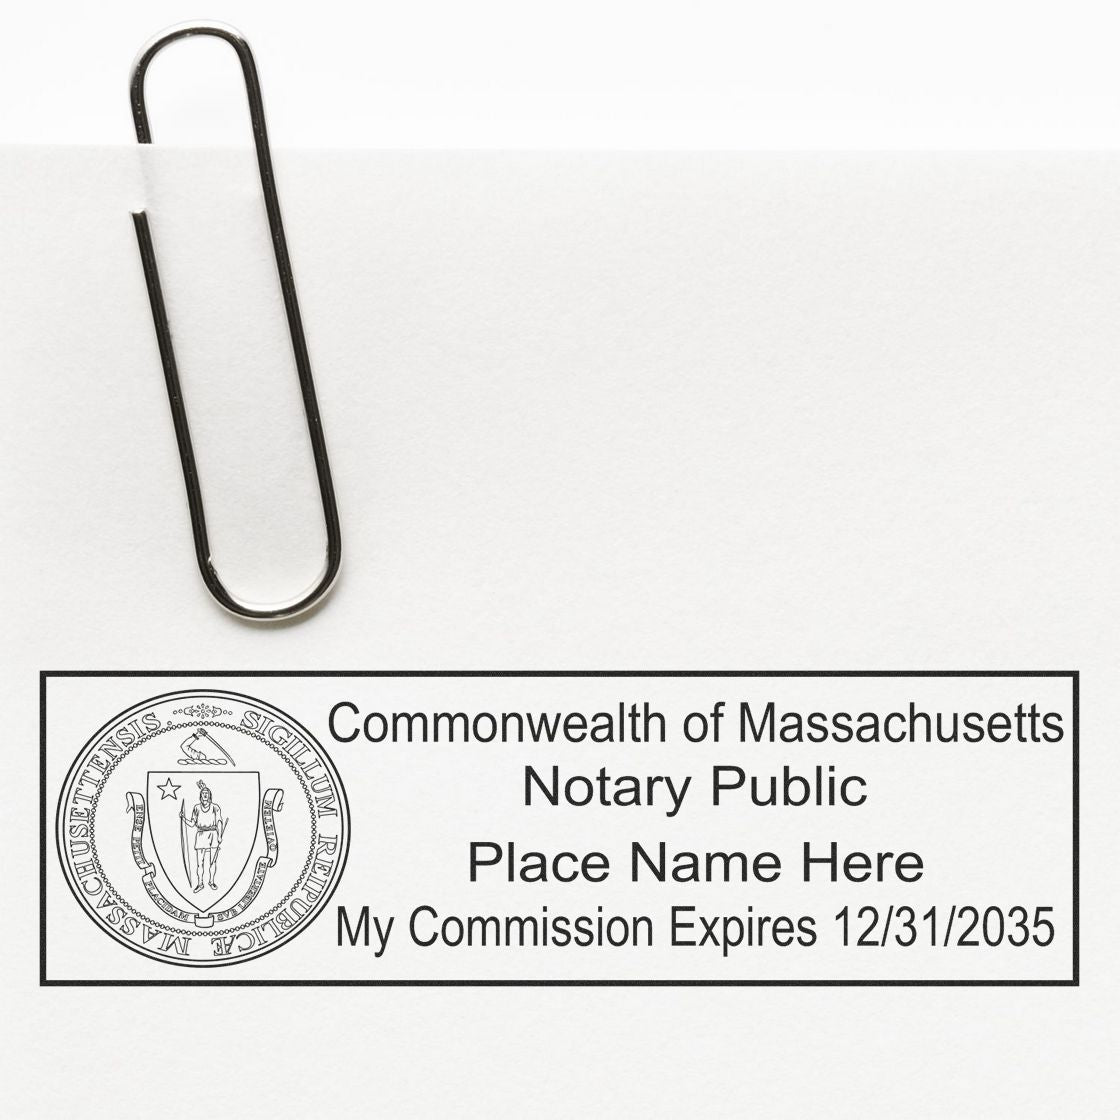 Another Example of a stamped impression of the Self-Inking State Seal Massachusetts Notary Stamp on a piece of office paper.